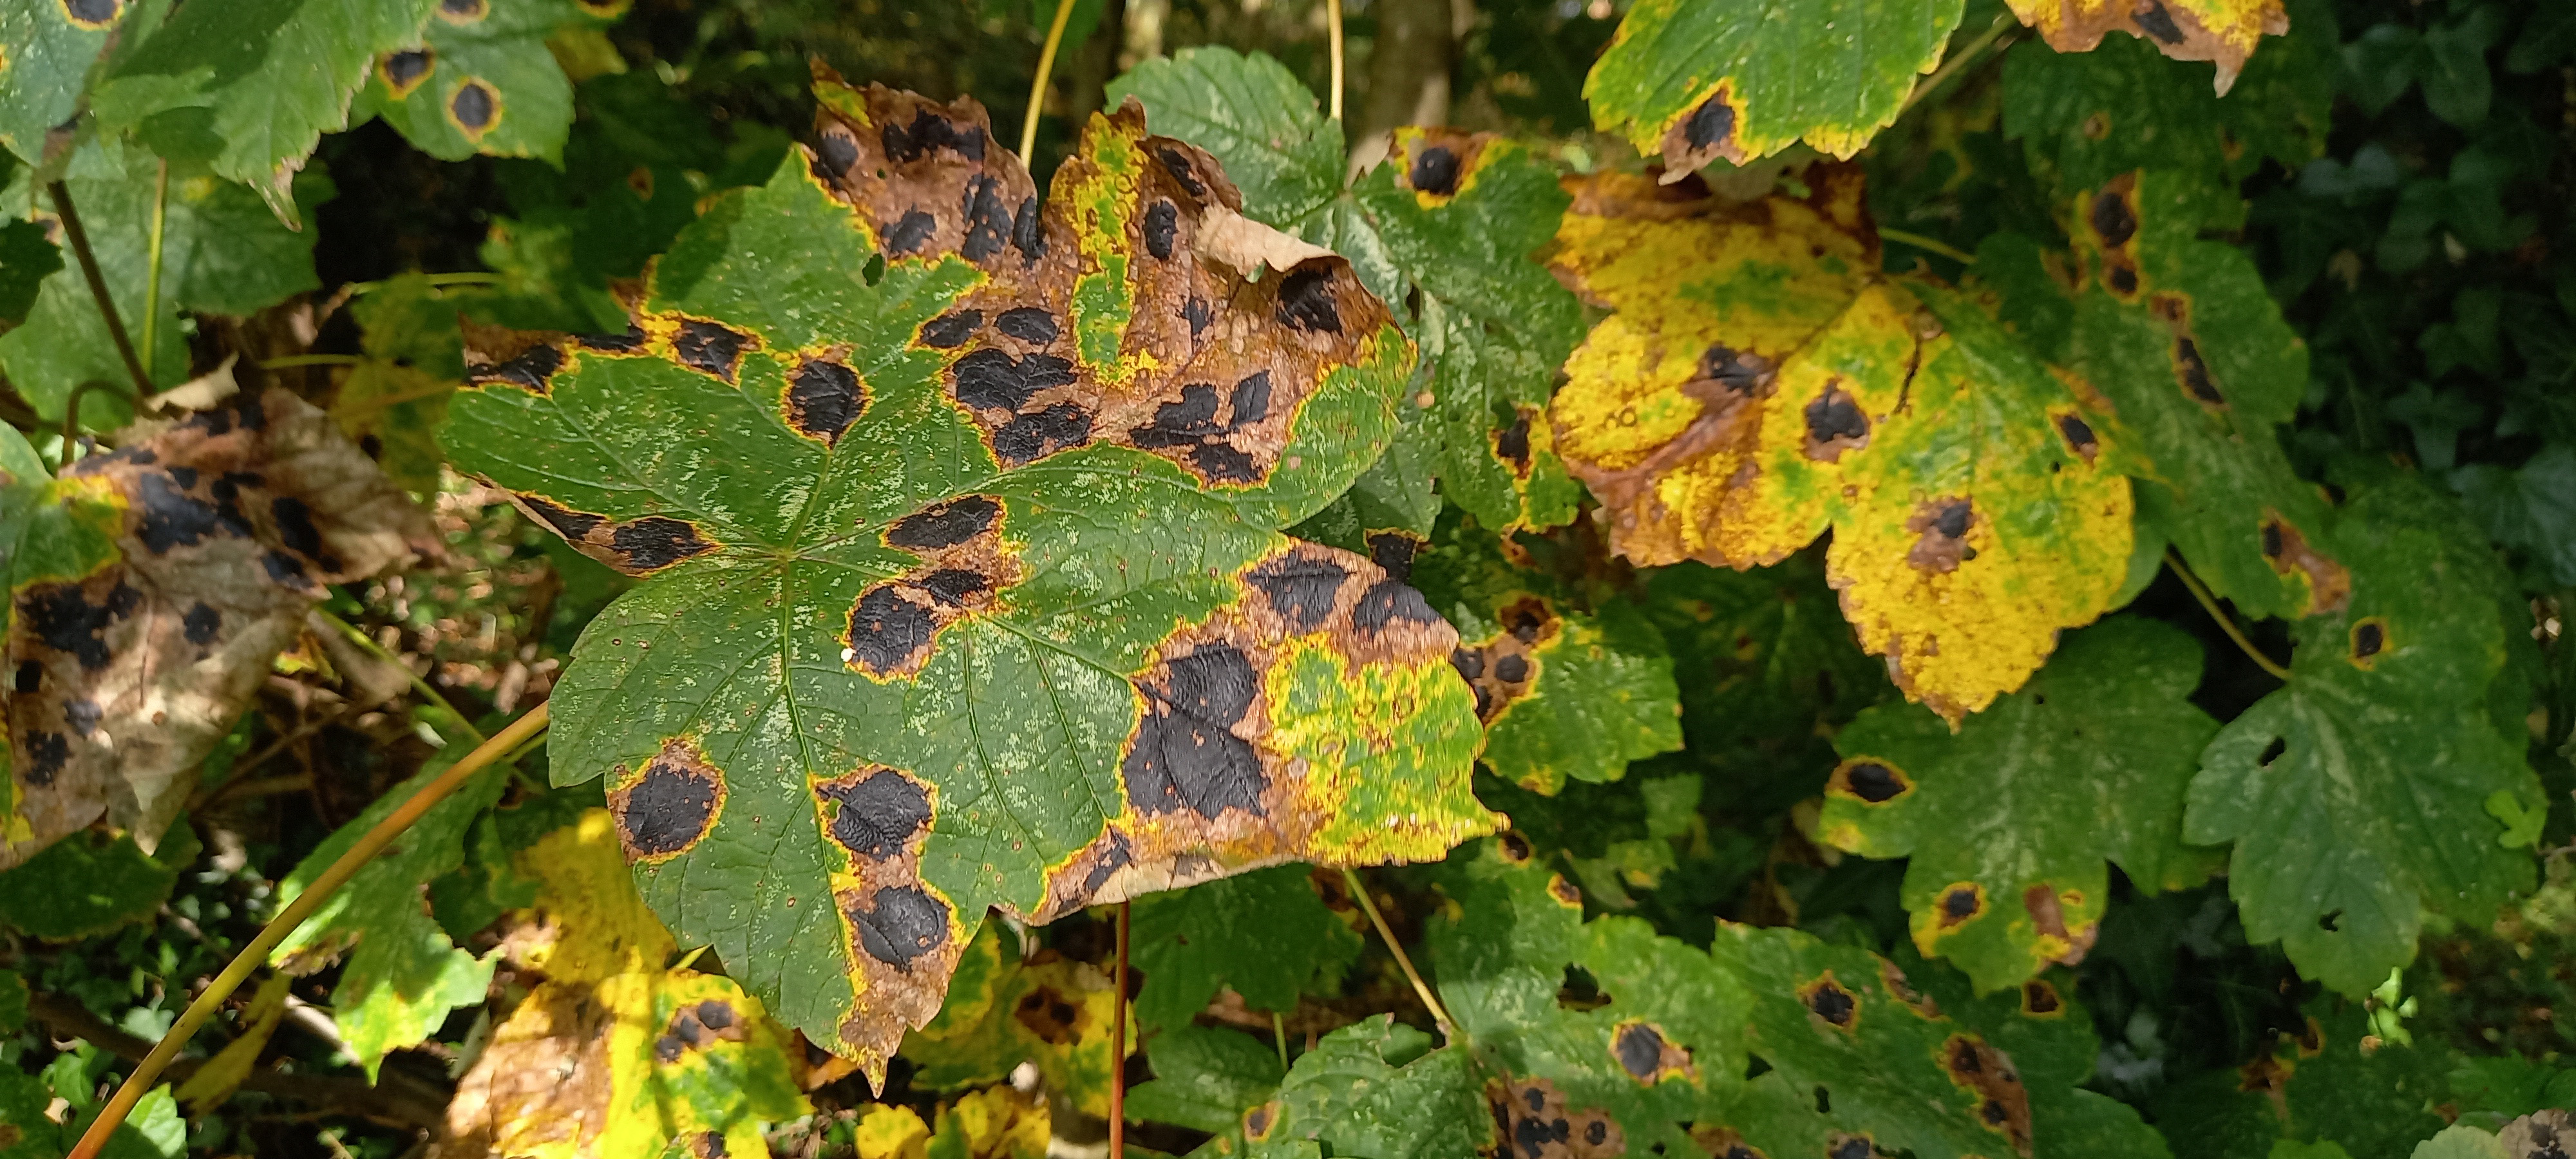 Tar Spot on Sycamore leaves